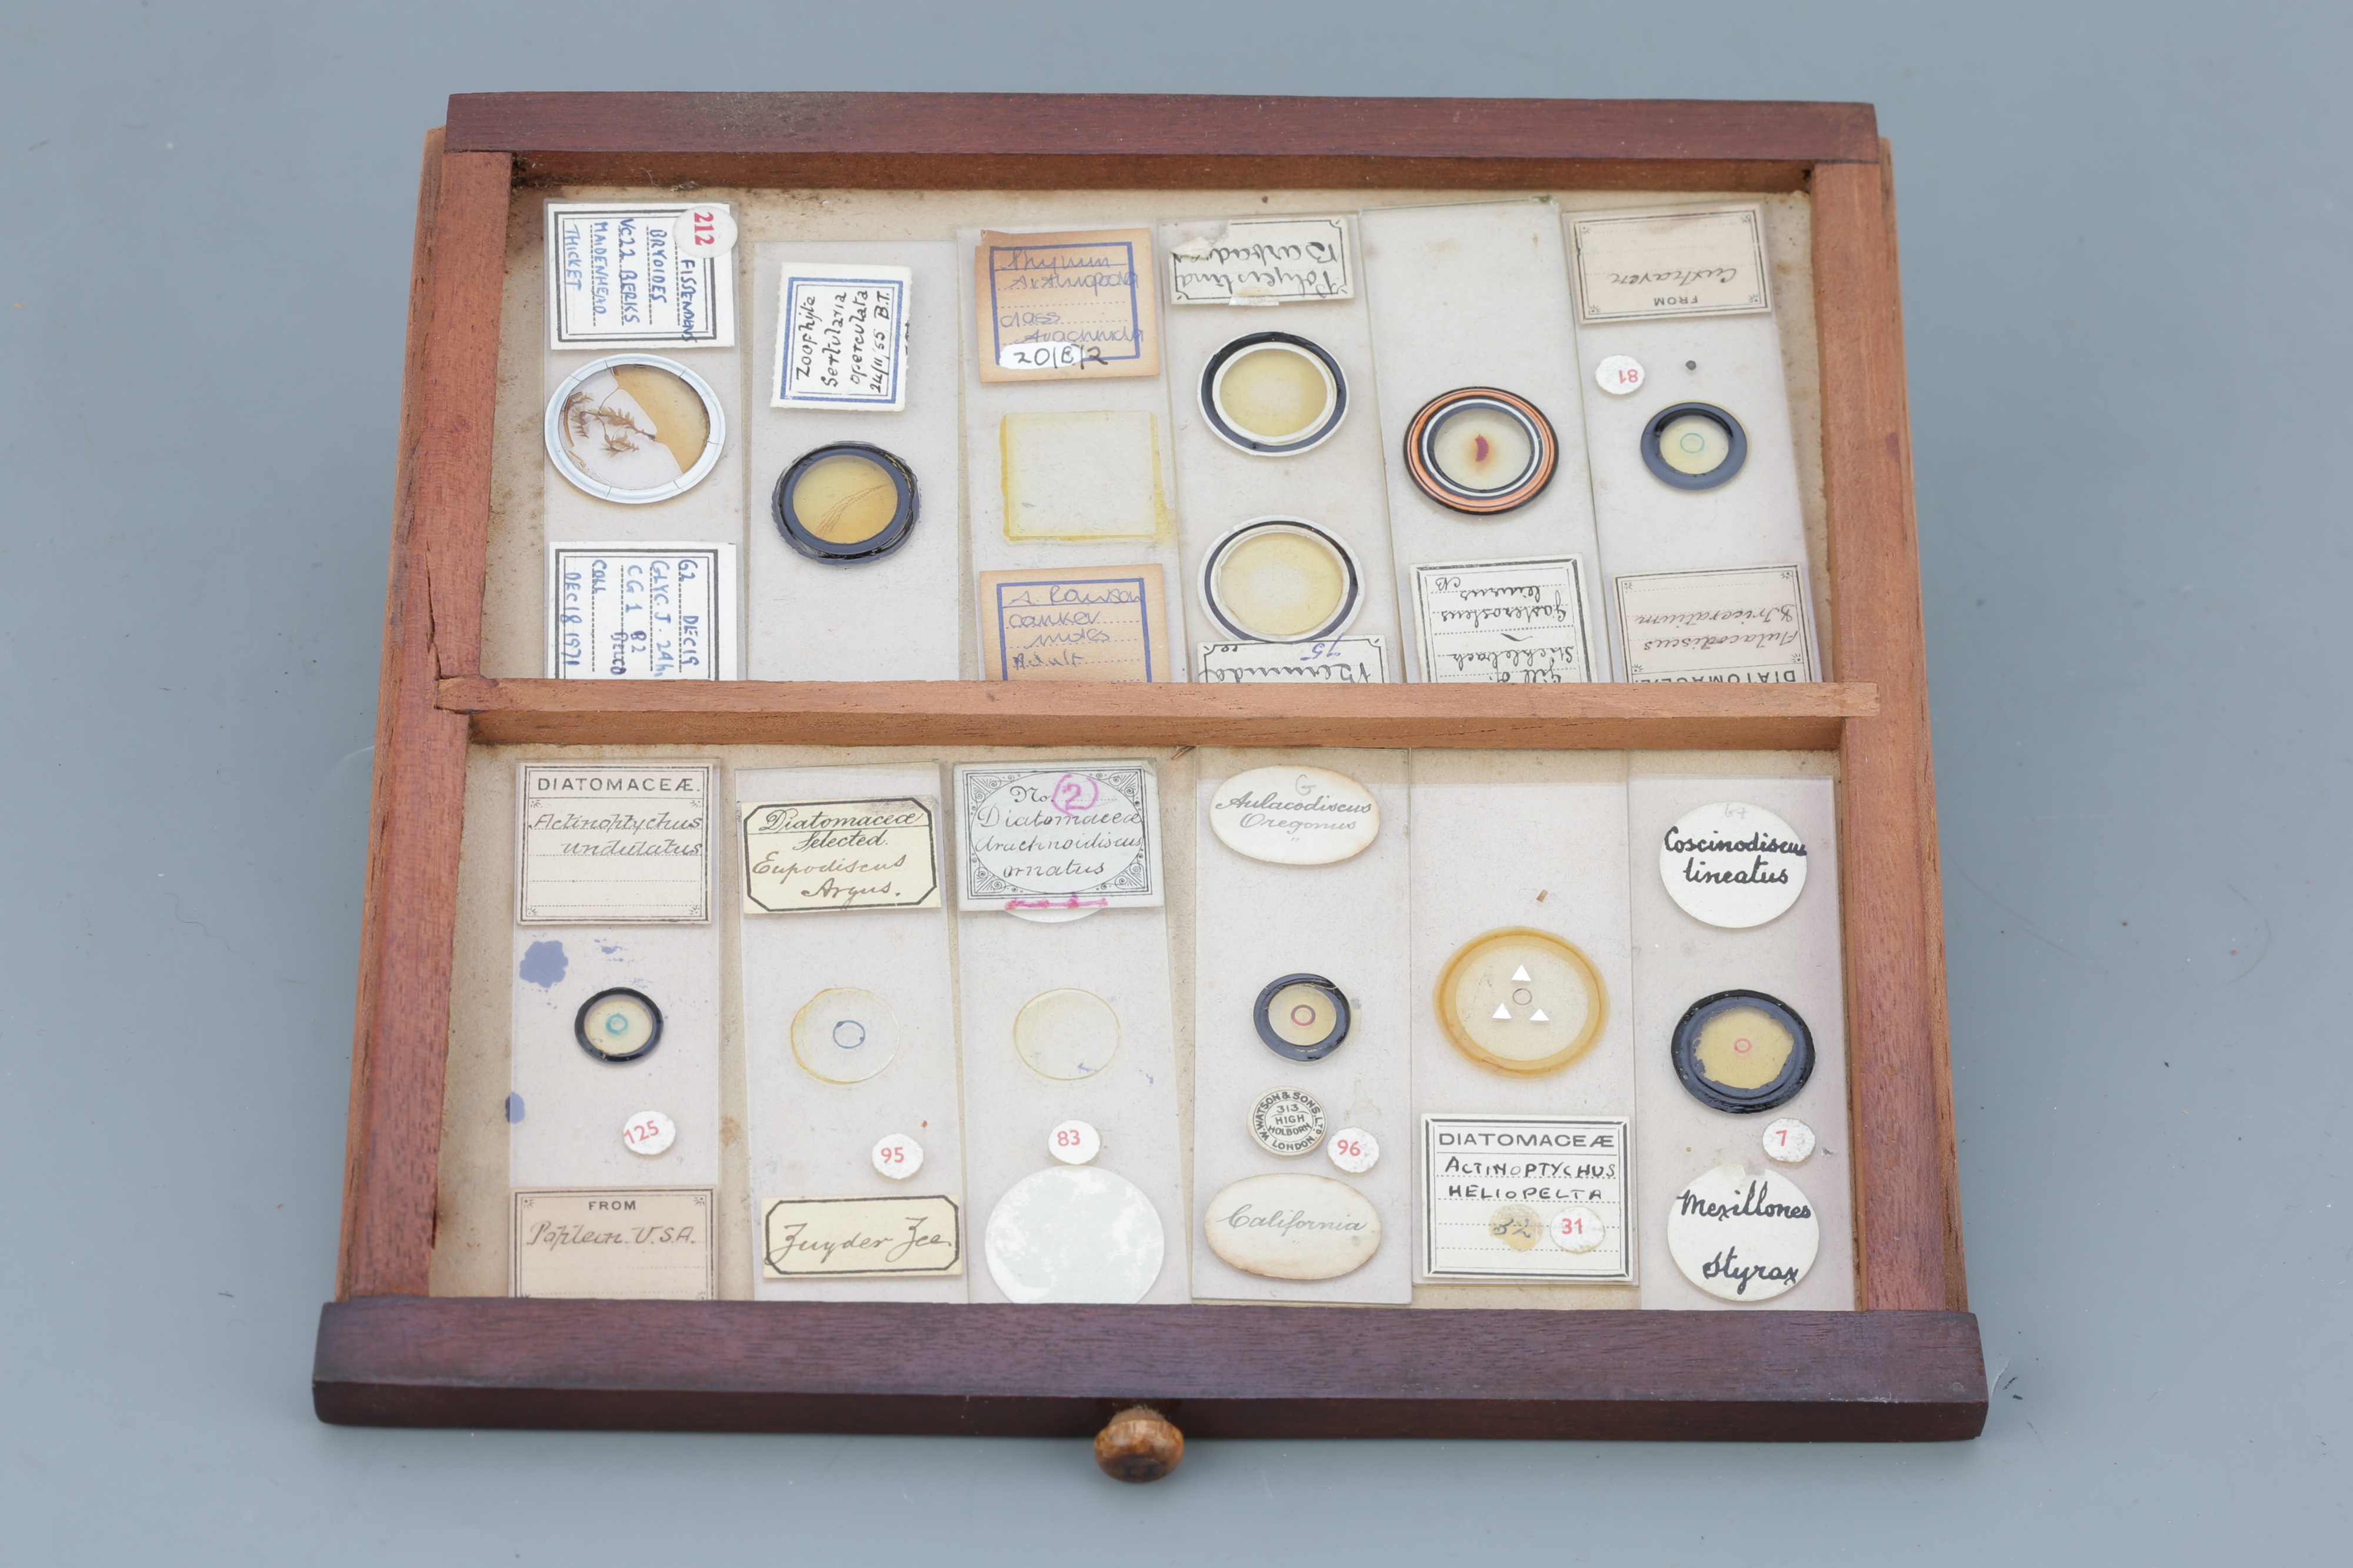 Microscope SlideCabinet & Slide Collection, - Image 11 of 15